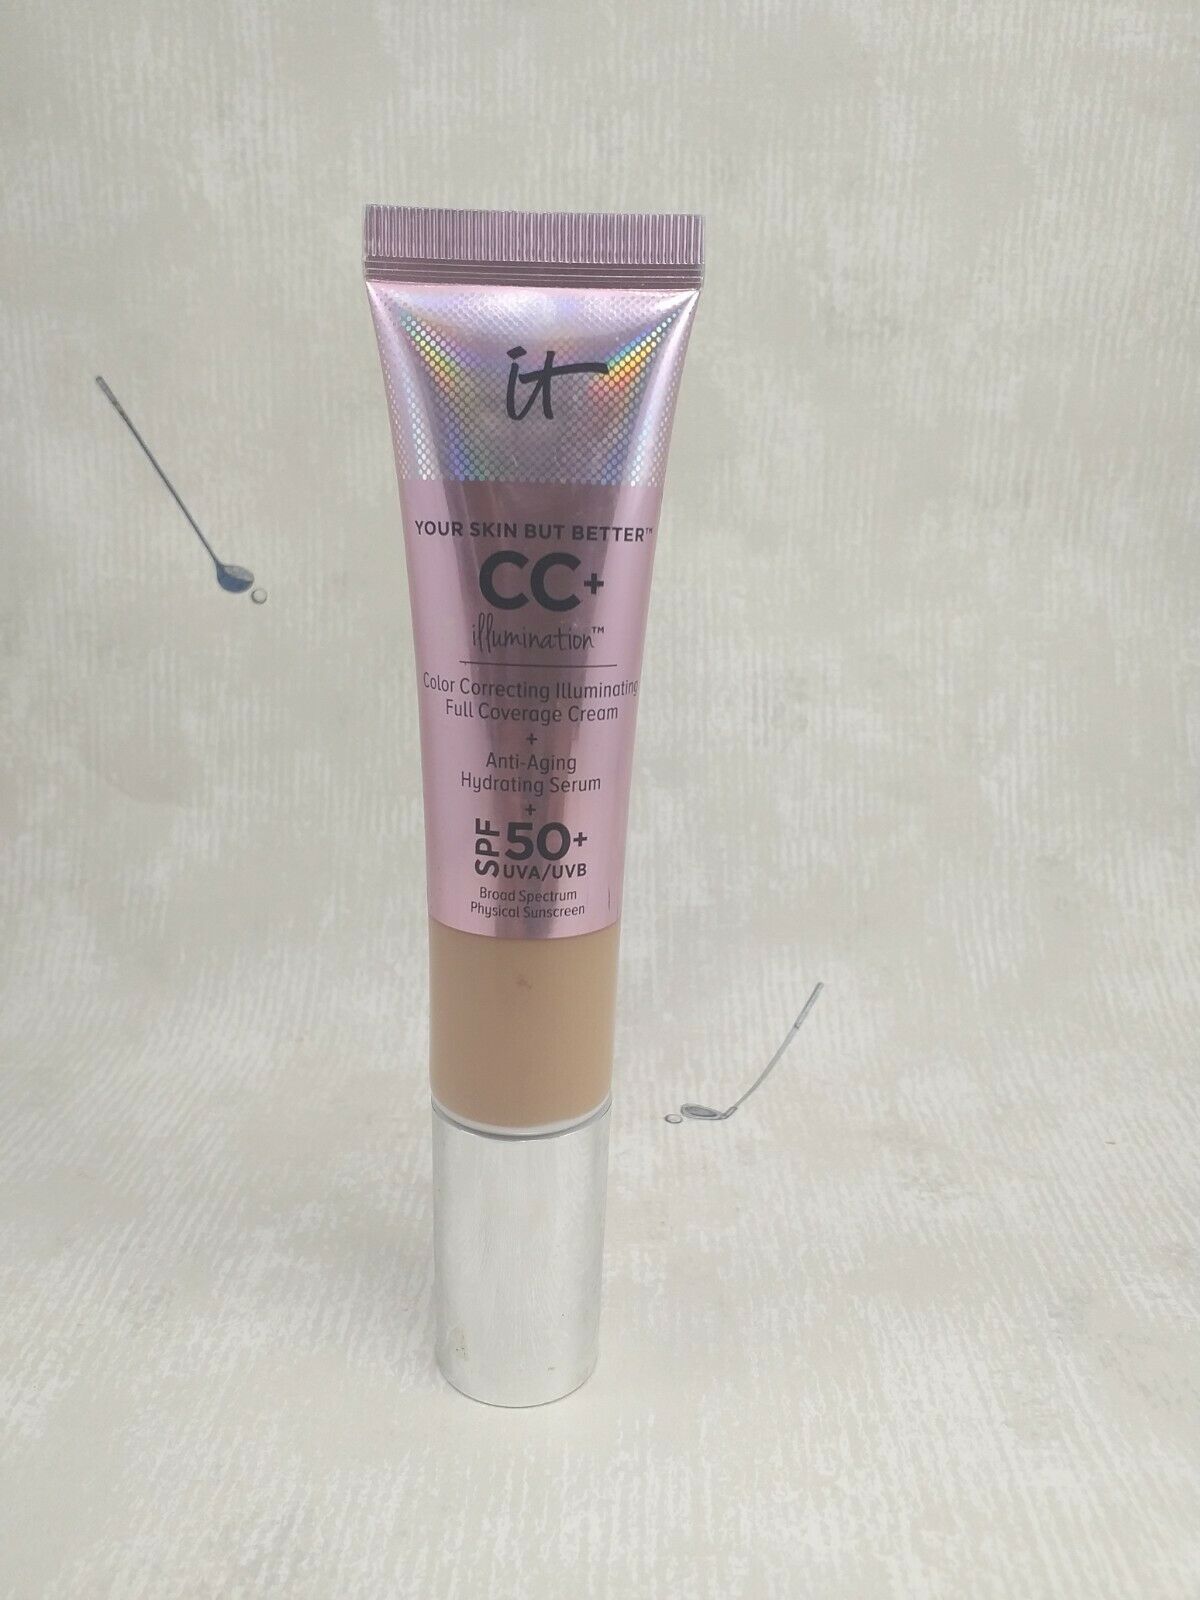 Primary image for It cosmetics CC+ Your Skin But Better SPF 50+ 32ml. MEDIUM